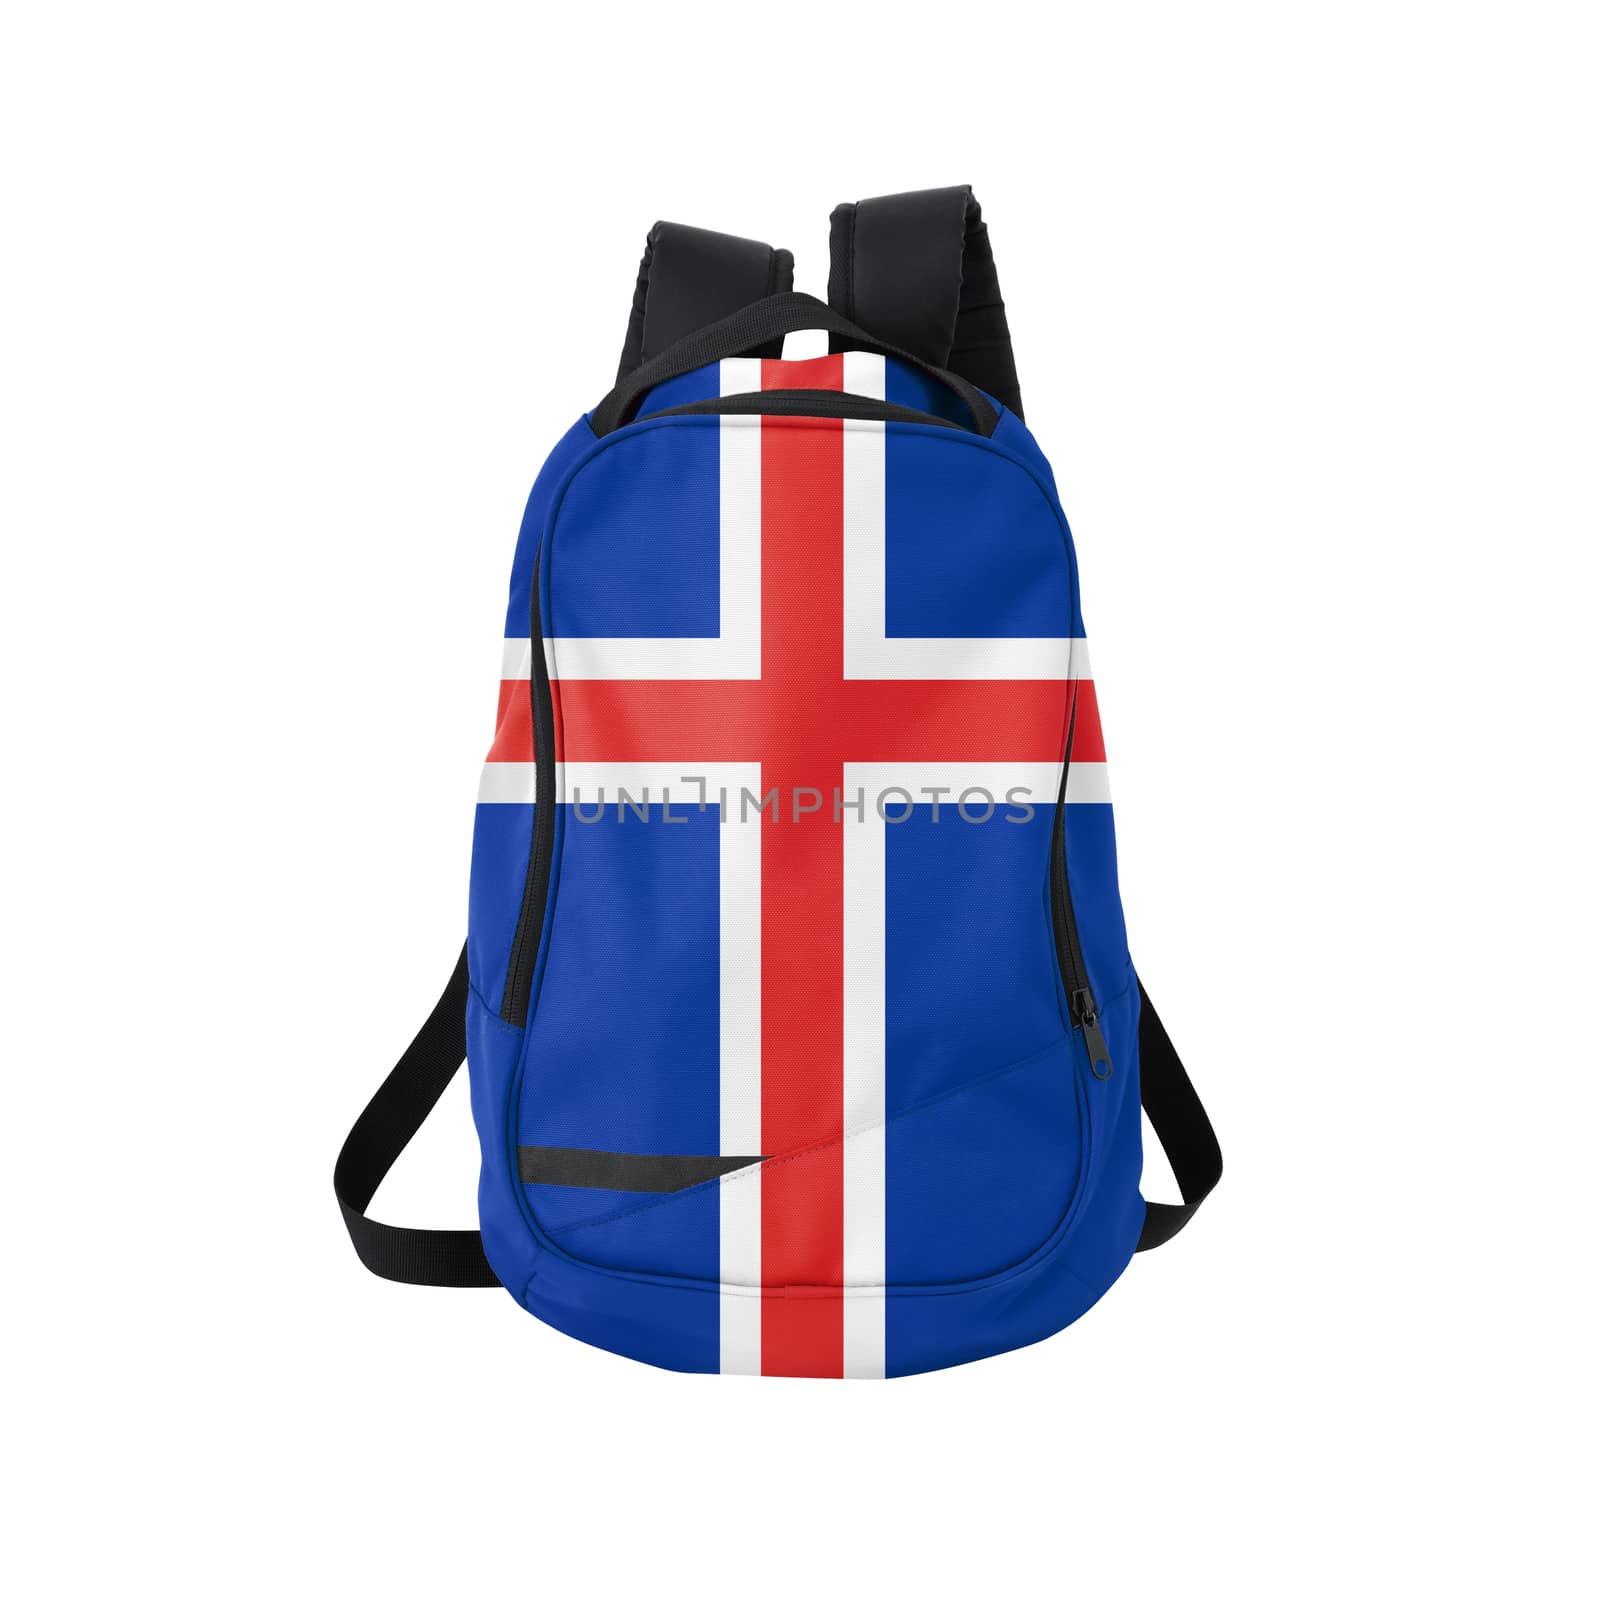 Iceland flag backpack isolated on white by kravcs